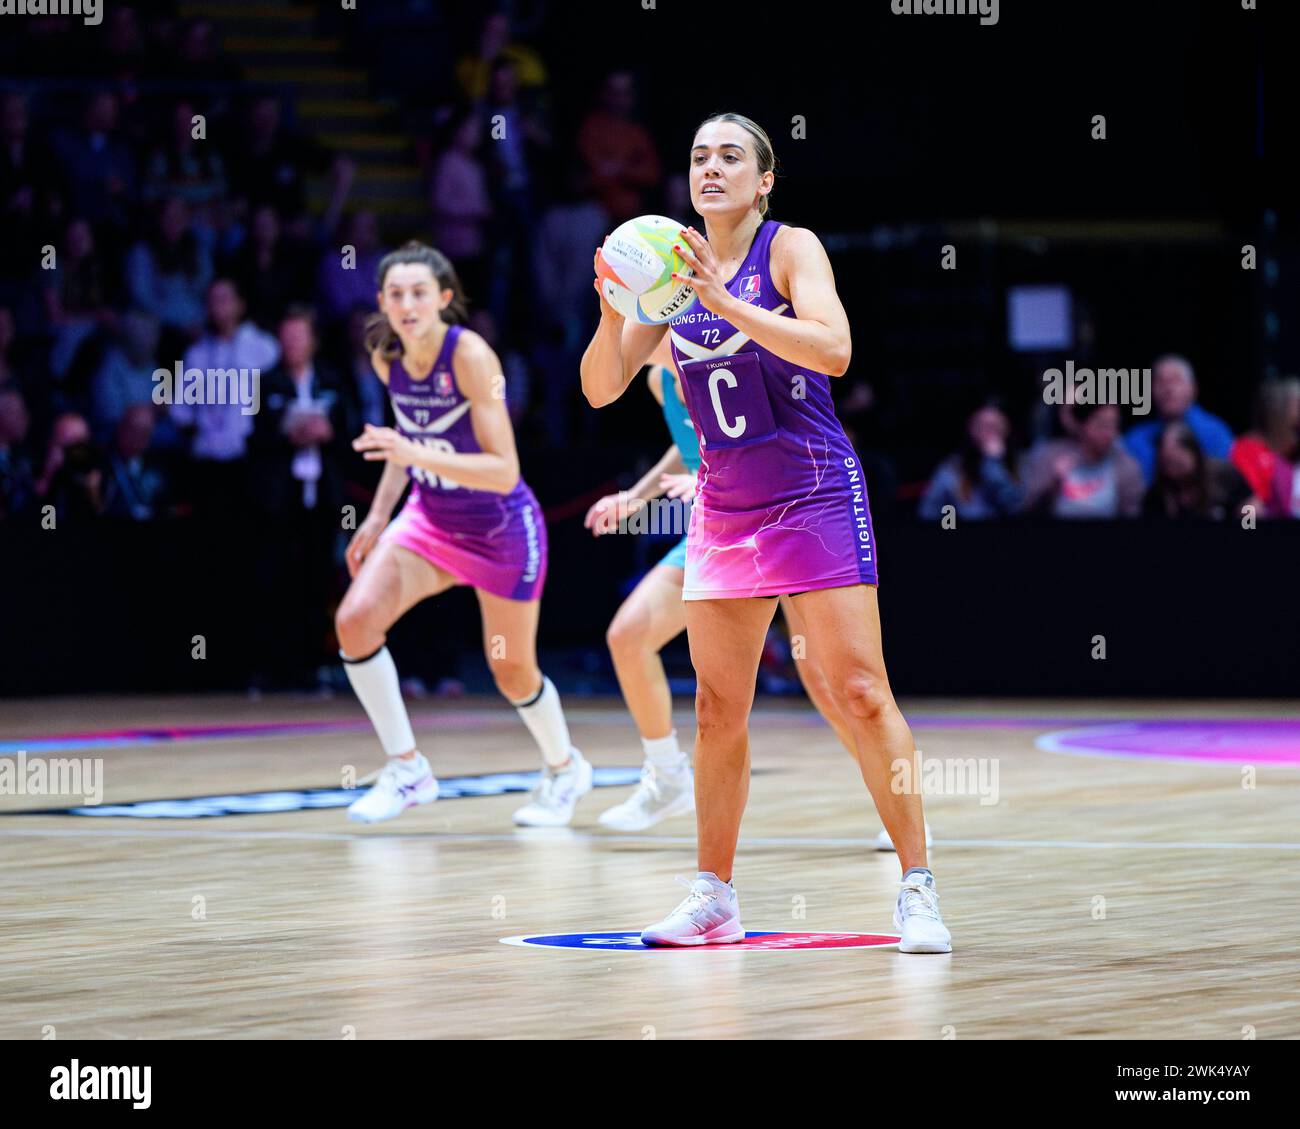 NOTTINGHAM, UNITED KINGDOM. Feb 17, 24. Nat Panagarry (right) in action during todays match of Loughborough Lightning v Surrey Storm during Netball Super League Season Opener 2024 at Motorpoint Arena on Saturday, February 17, 2024, NOTTINGHAM, ENGLAND. Credit: Taka G Wu/Alamy Live News Stock Photo